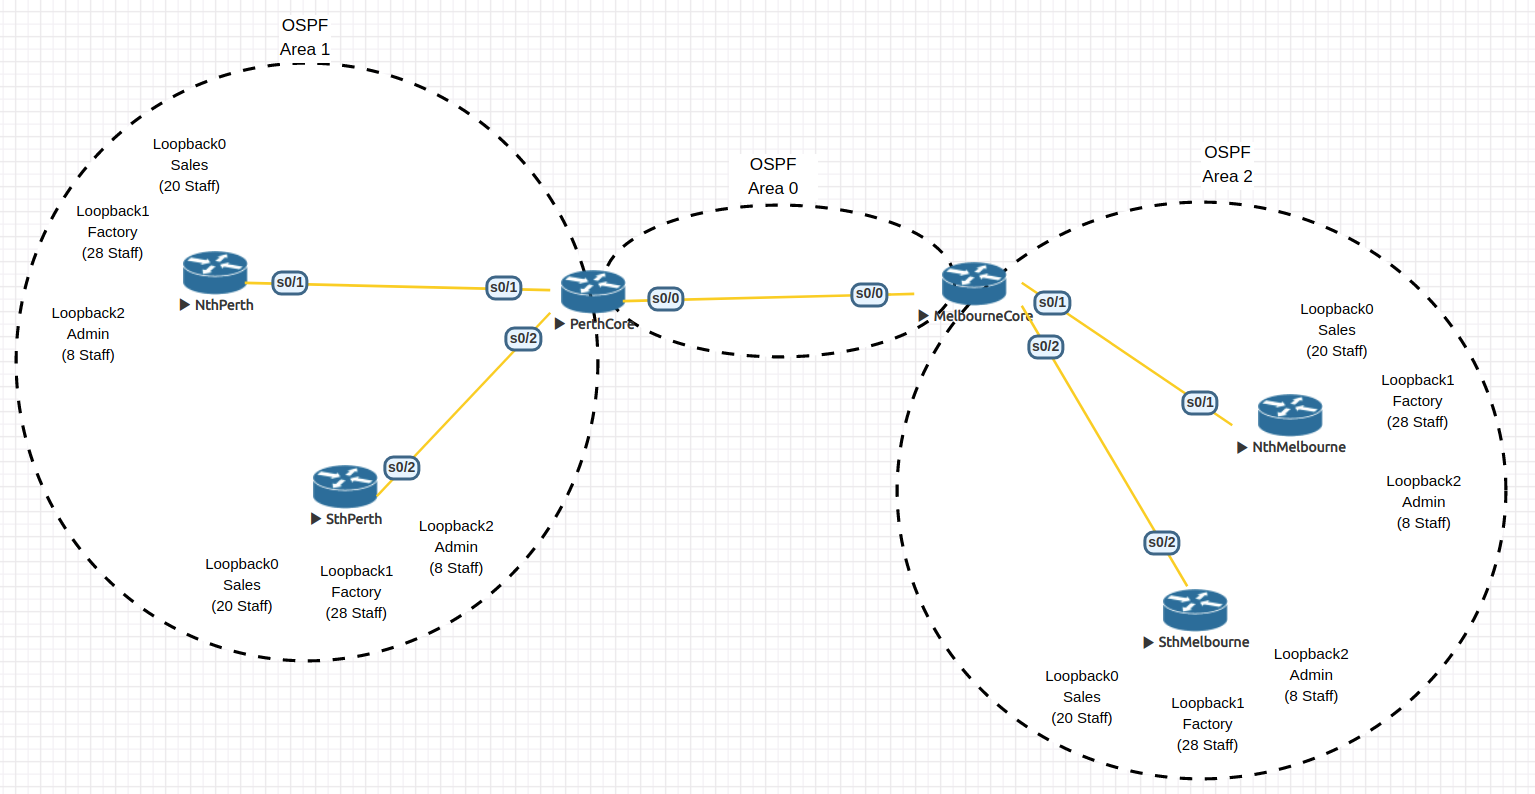 OSPF-MA-EVE.png.png